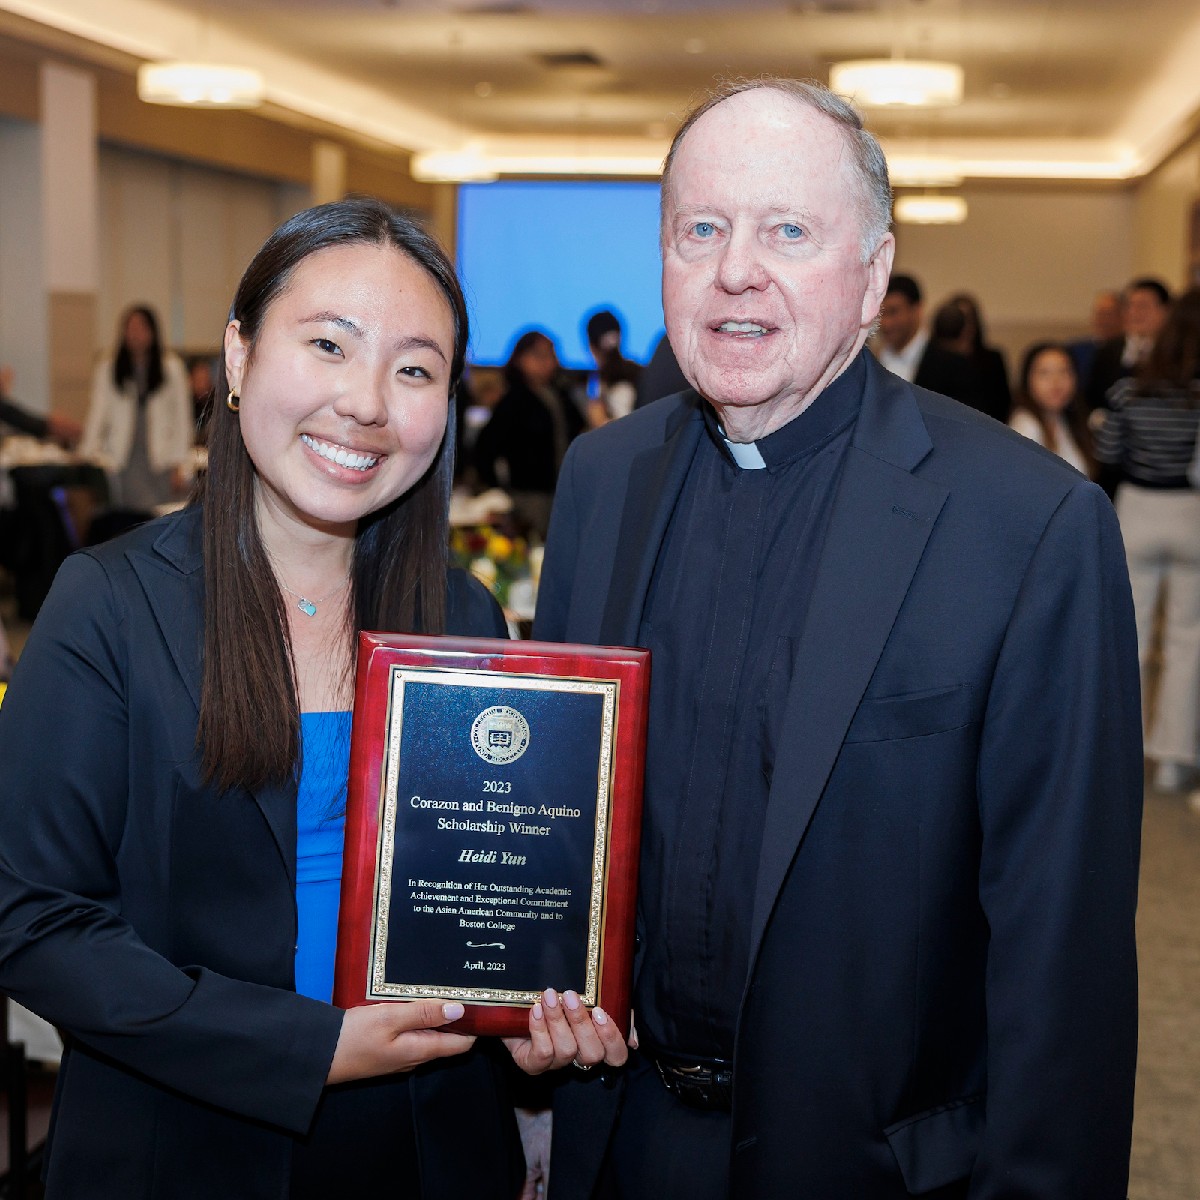 Heidi Yun ’24 is the winner of the 2023 Benigno and Corazon Aquino Scholarship.

Her BC experience includes advocacy for students with disabilities, promoting greater awareness of Asian culture, and work on behalf of low-income persons in Boston. on.bc.edu/HeidiYun